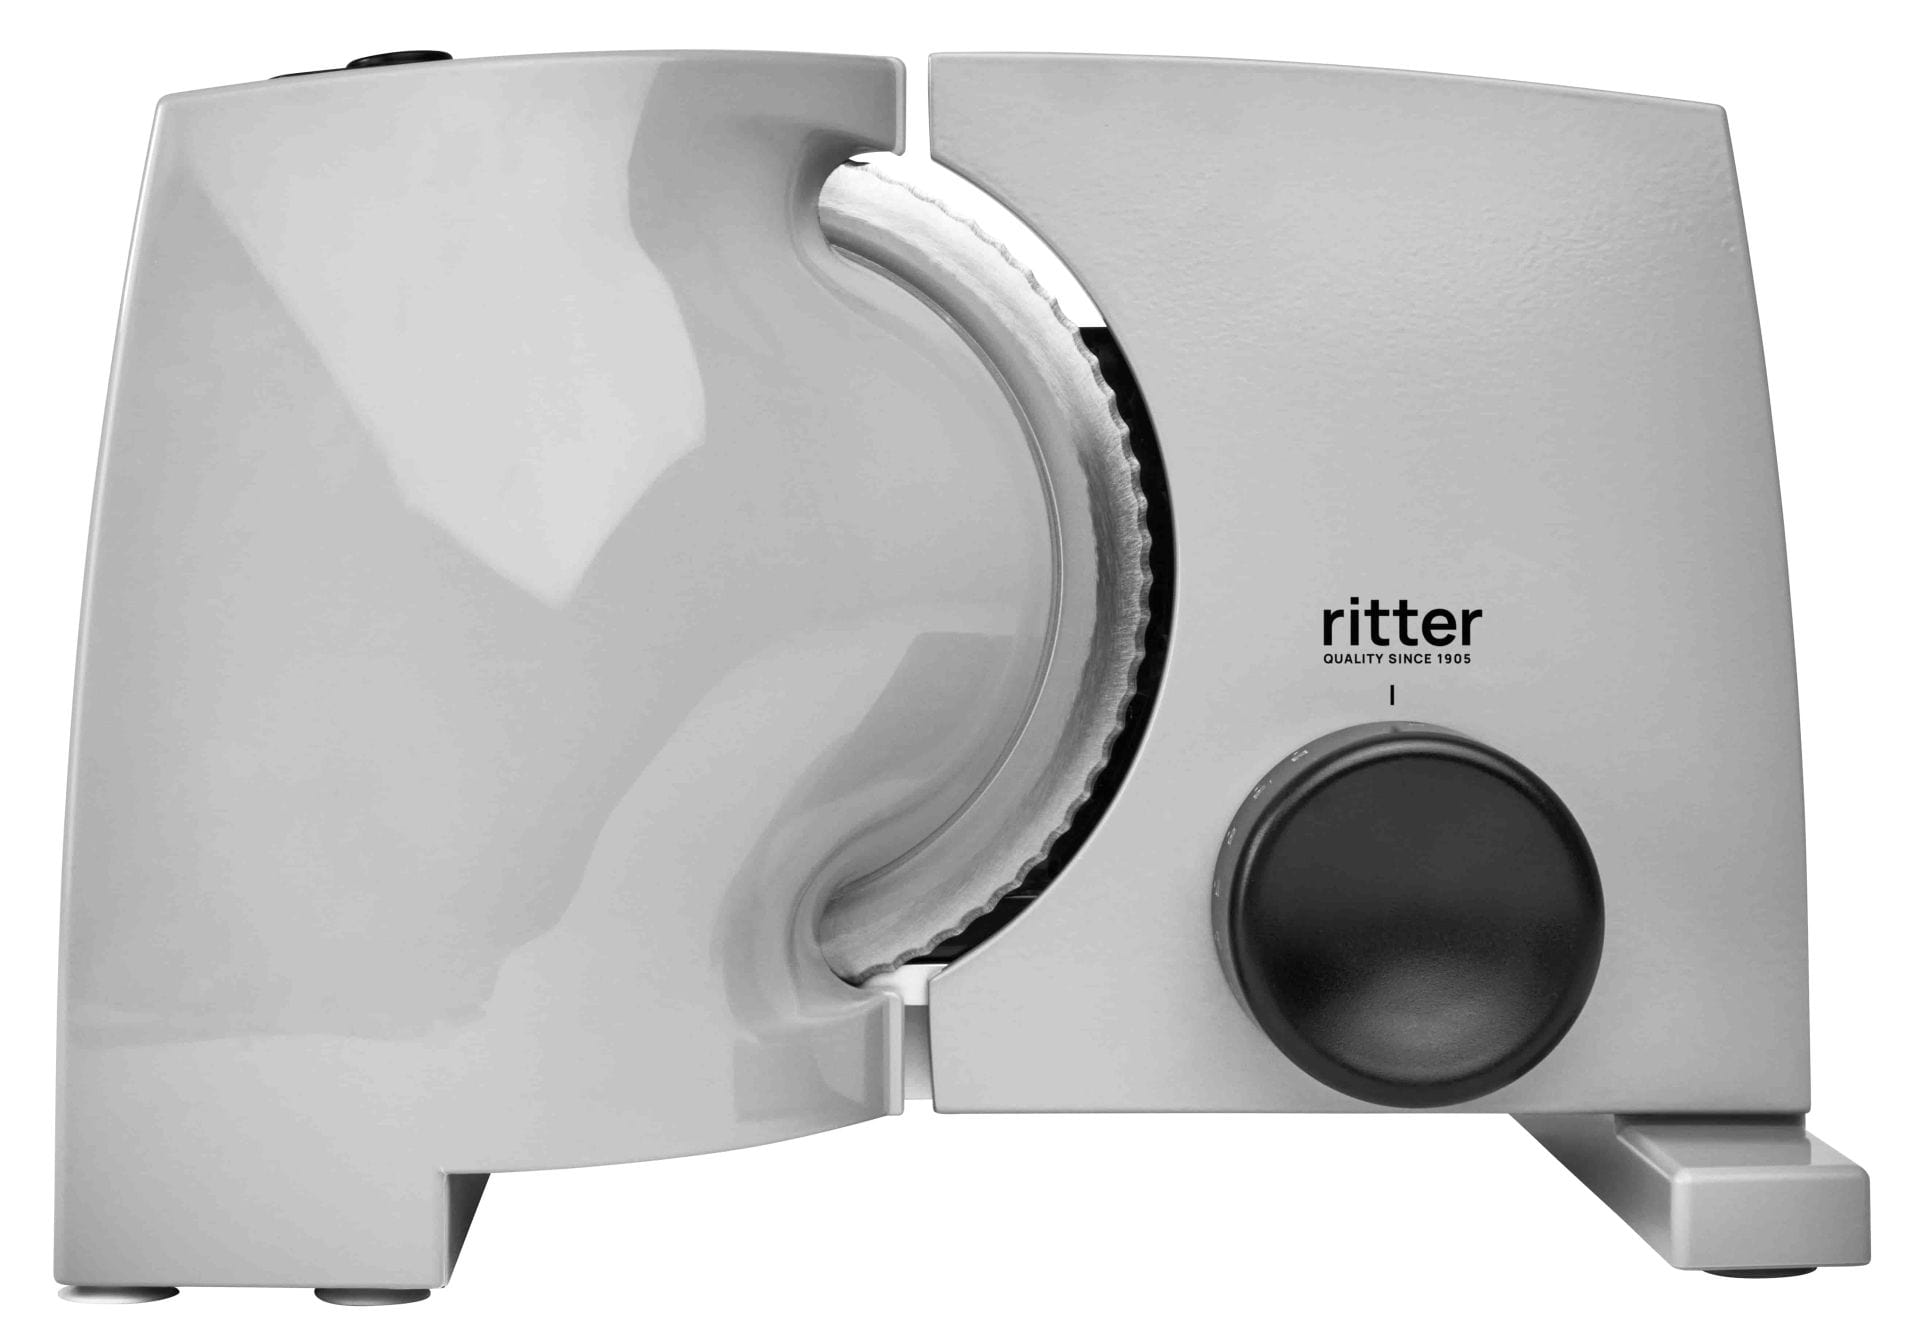 107022 Ritter Hand Operated Food Slicer - Bread Slicer Piatto 5 , Brot –  German Specialty Imports llc